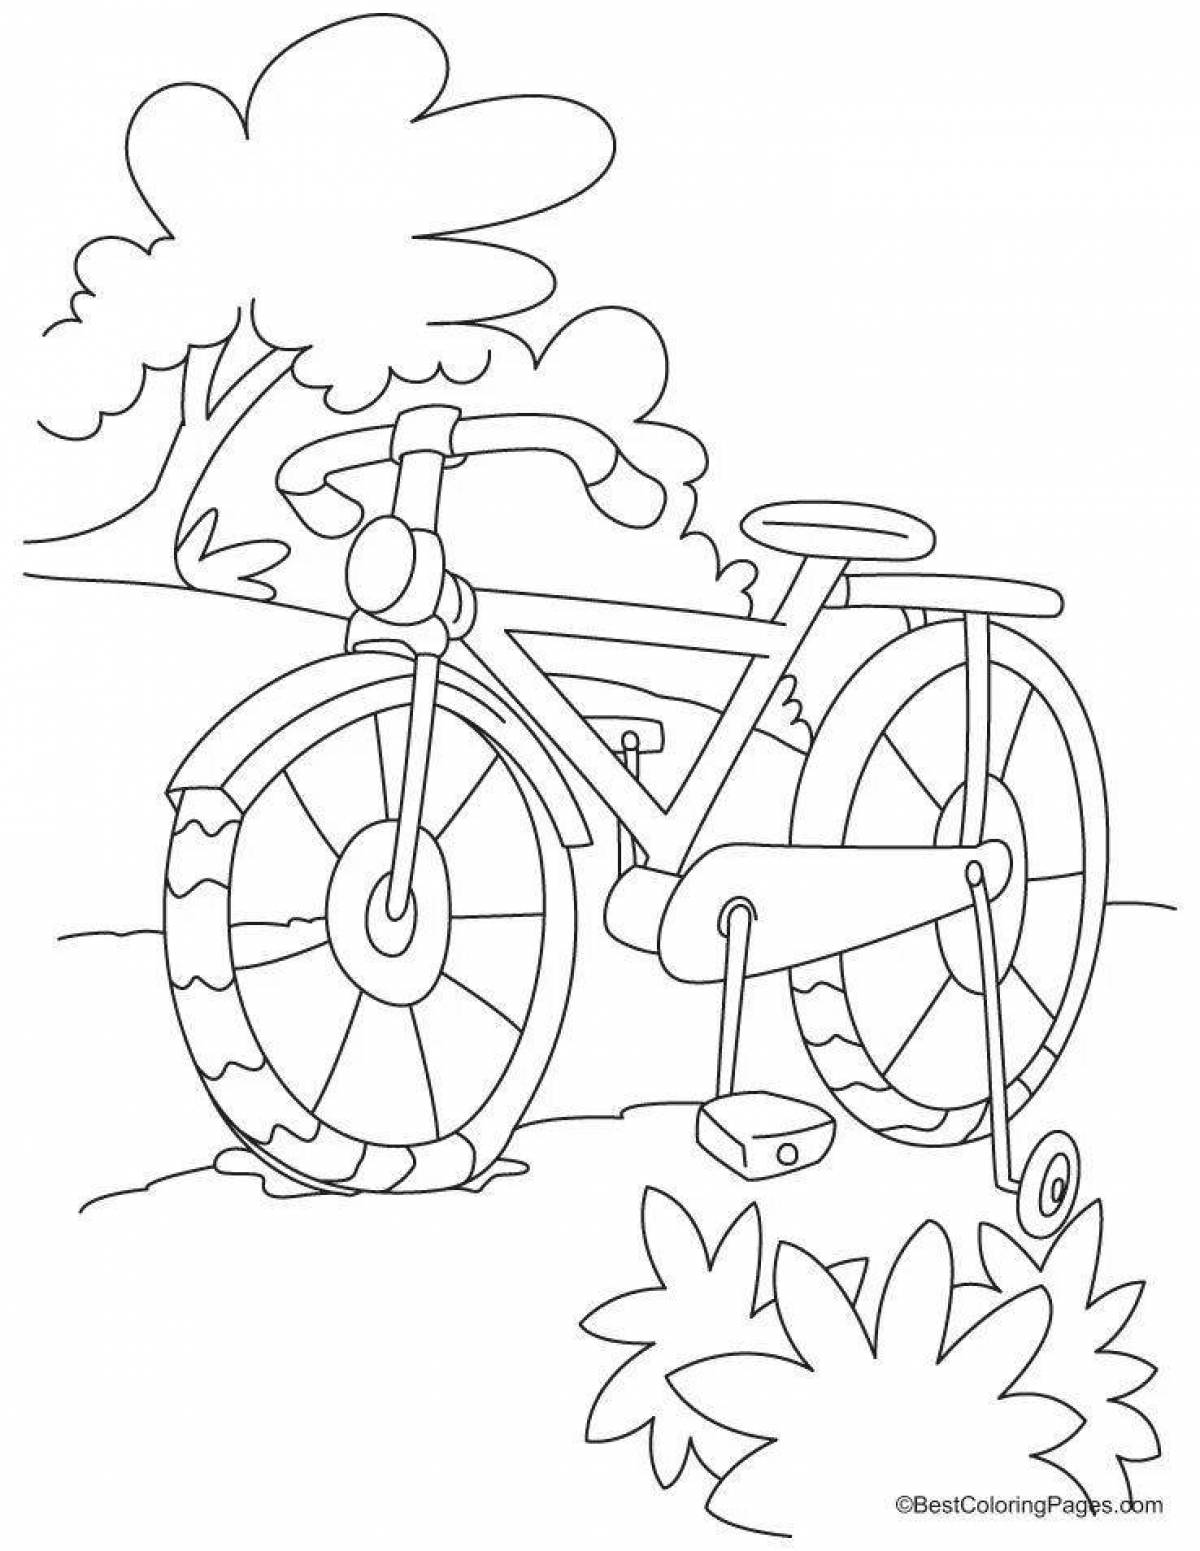 Amazing bike coloring book for kids